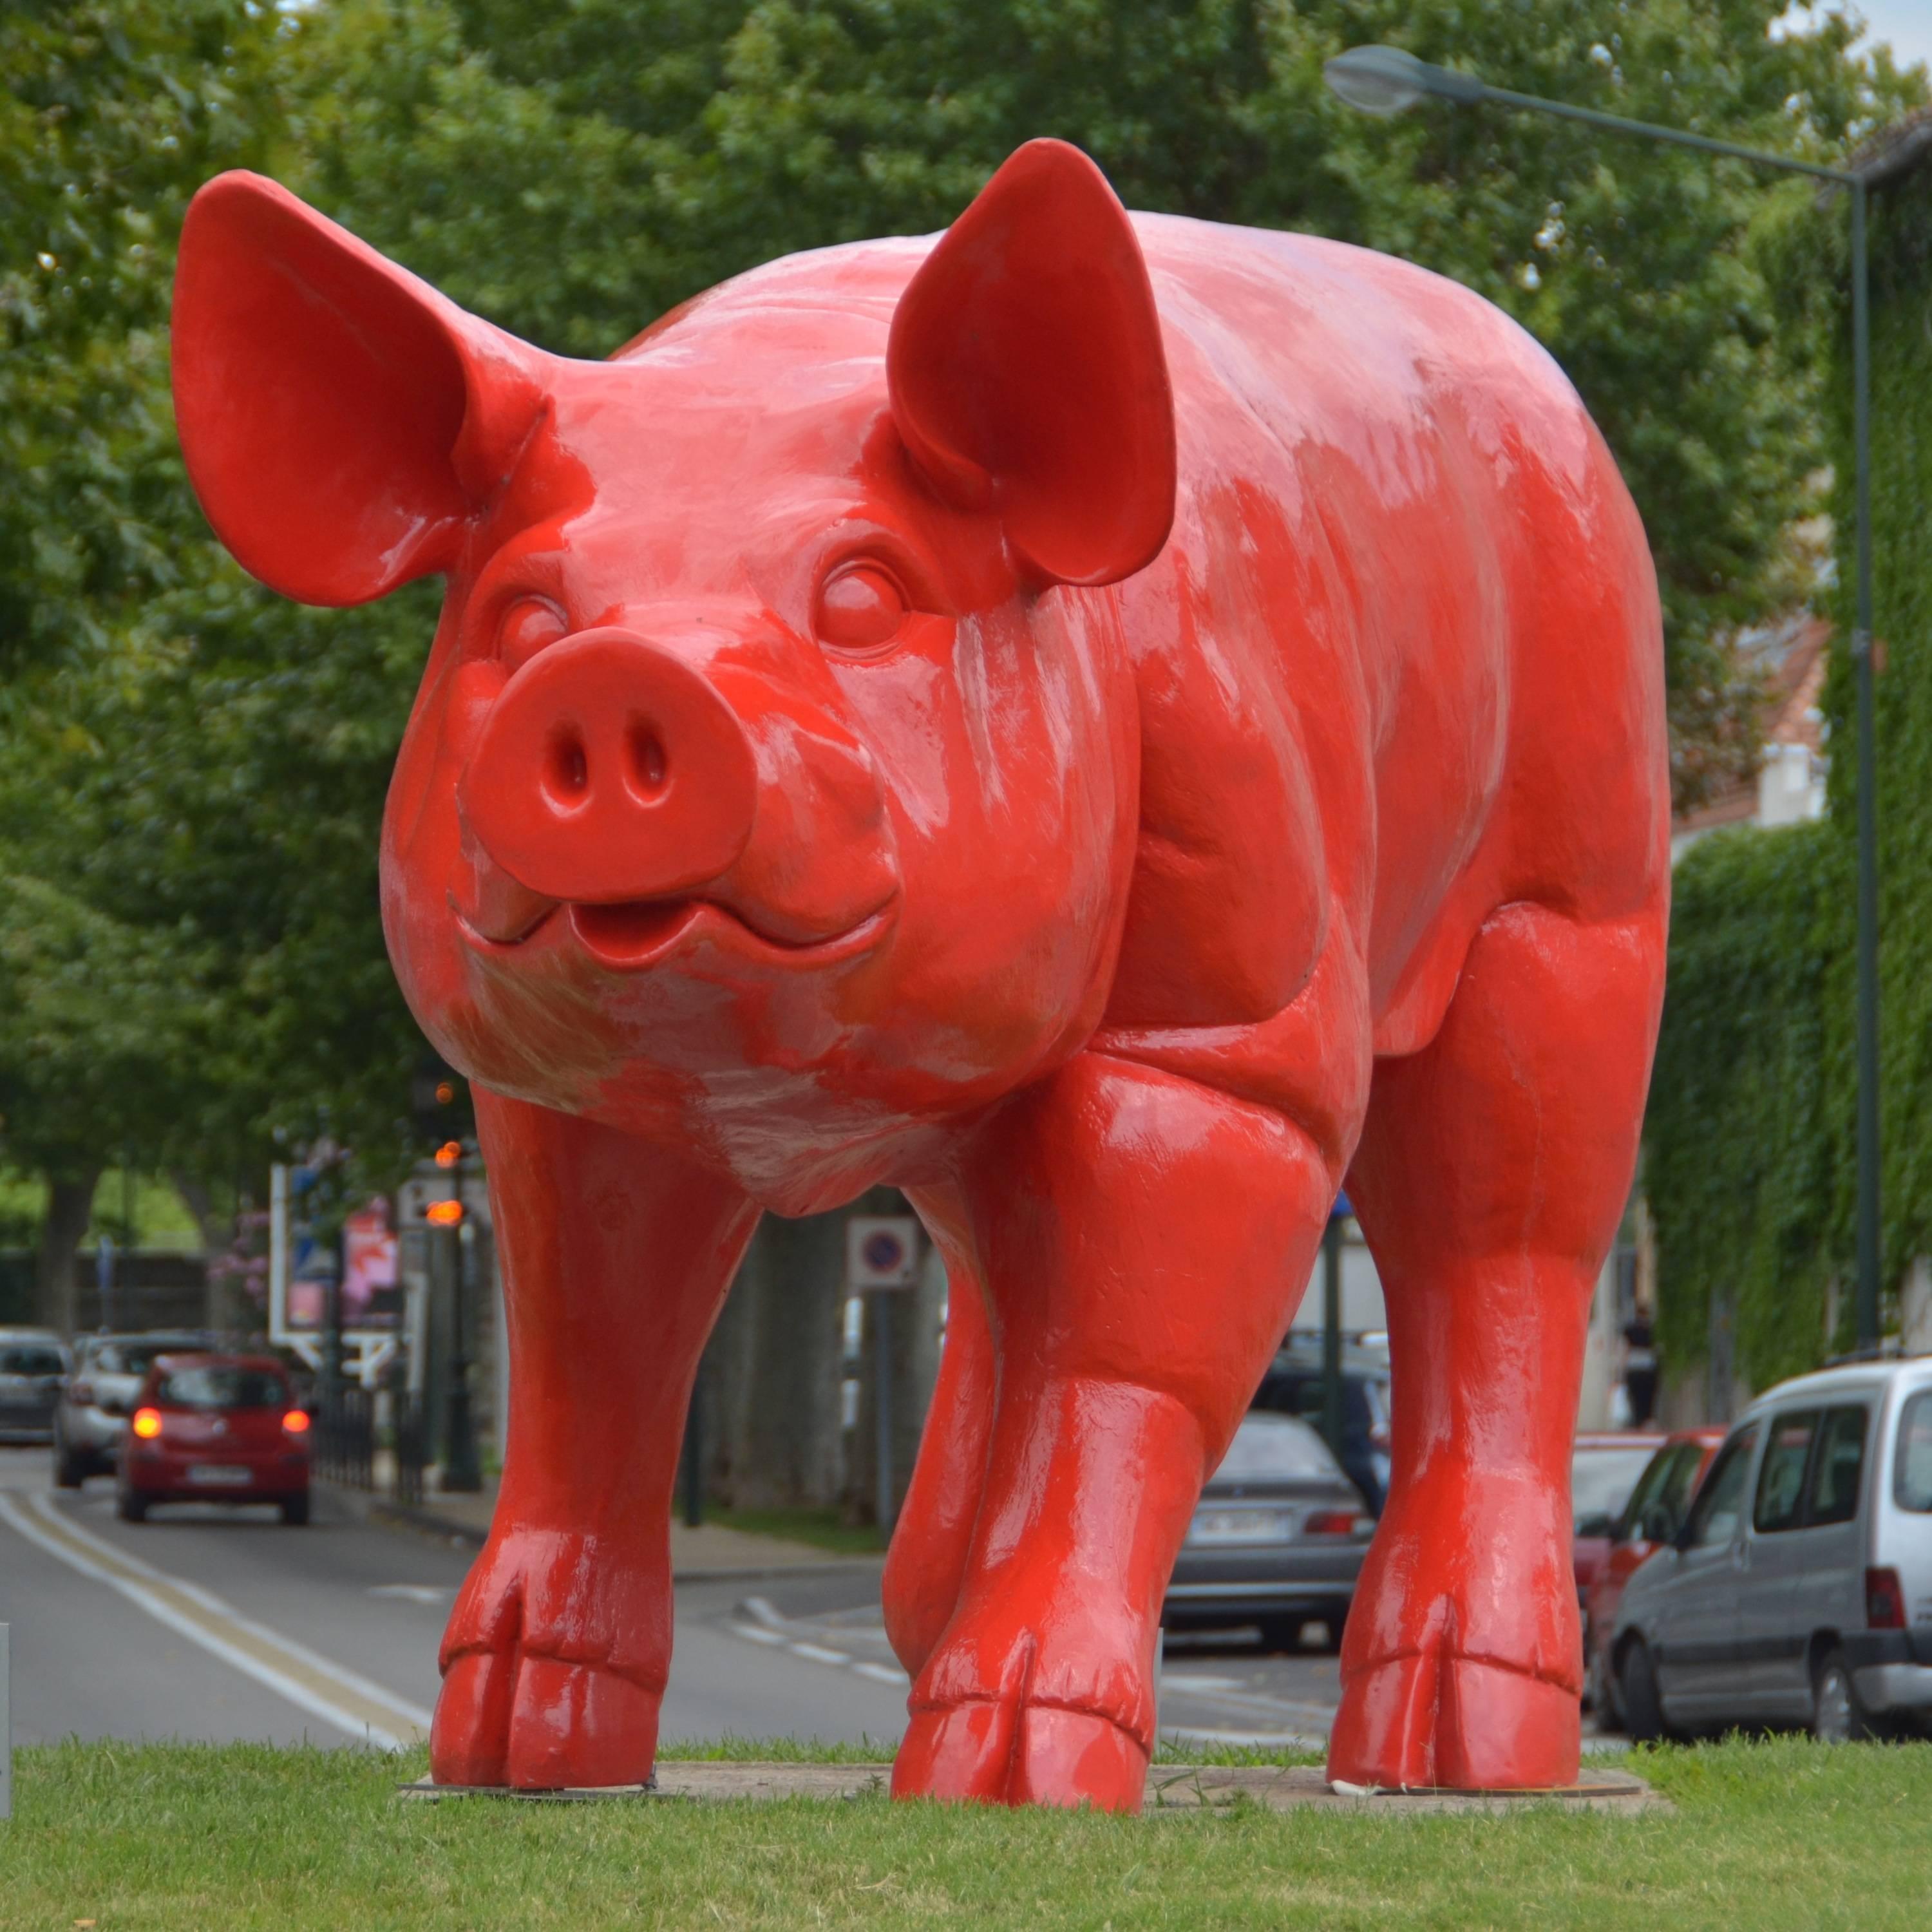 Cloned giant Pig - Sculpture by William Sweetlove